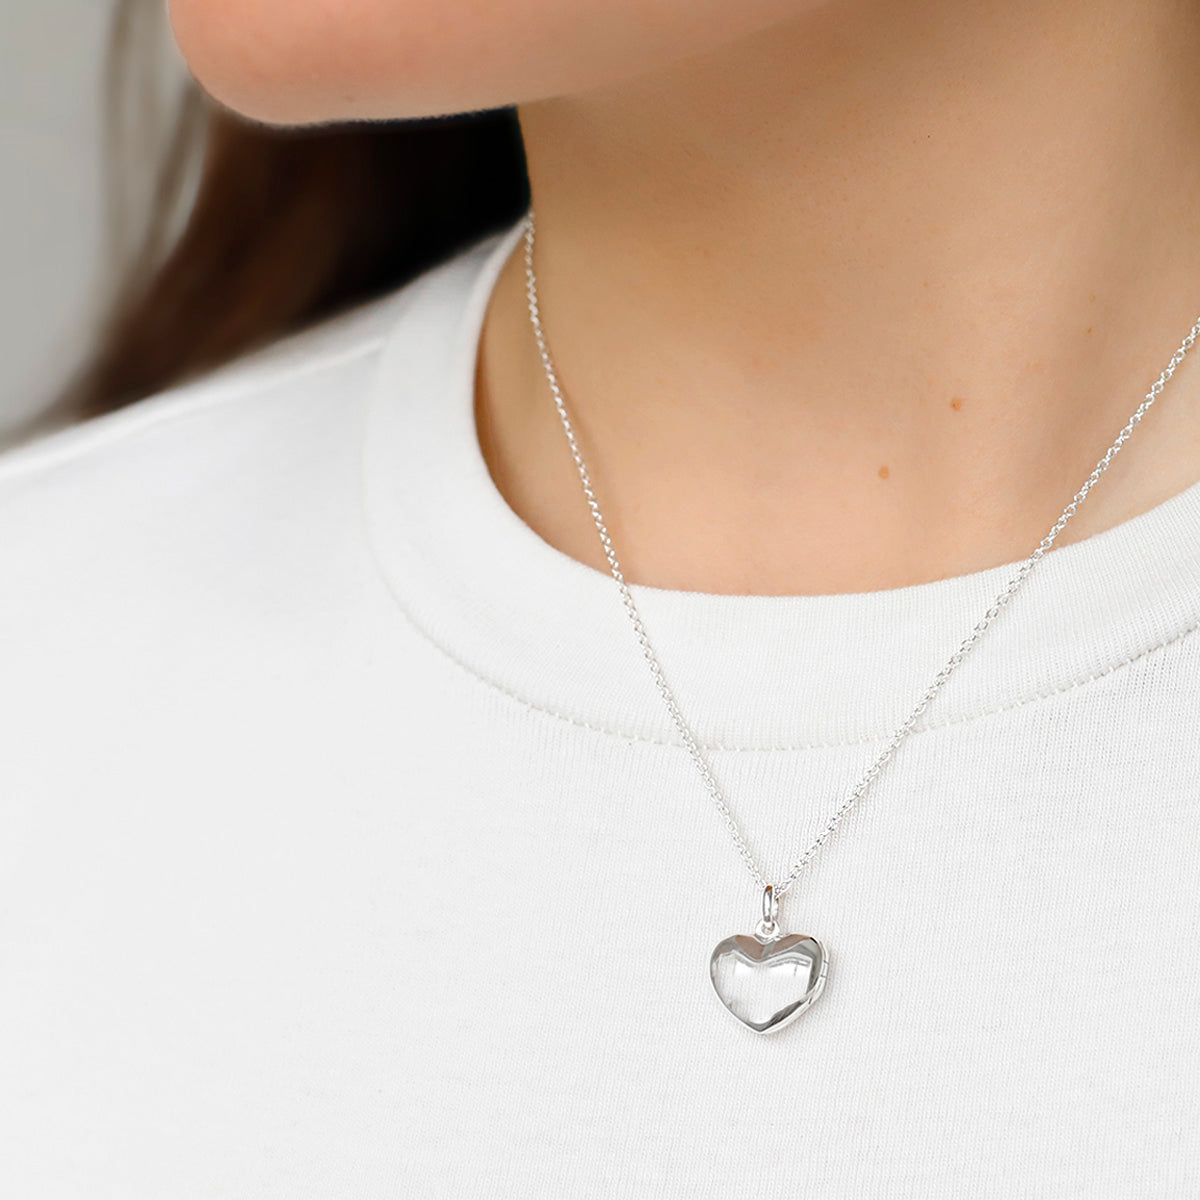 Small silver heart locket and chain